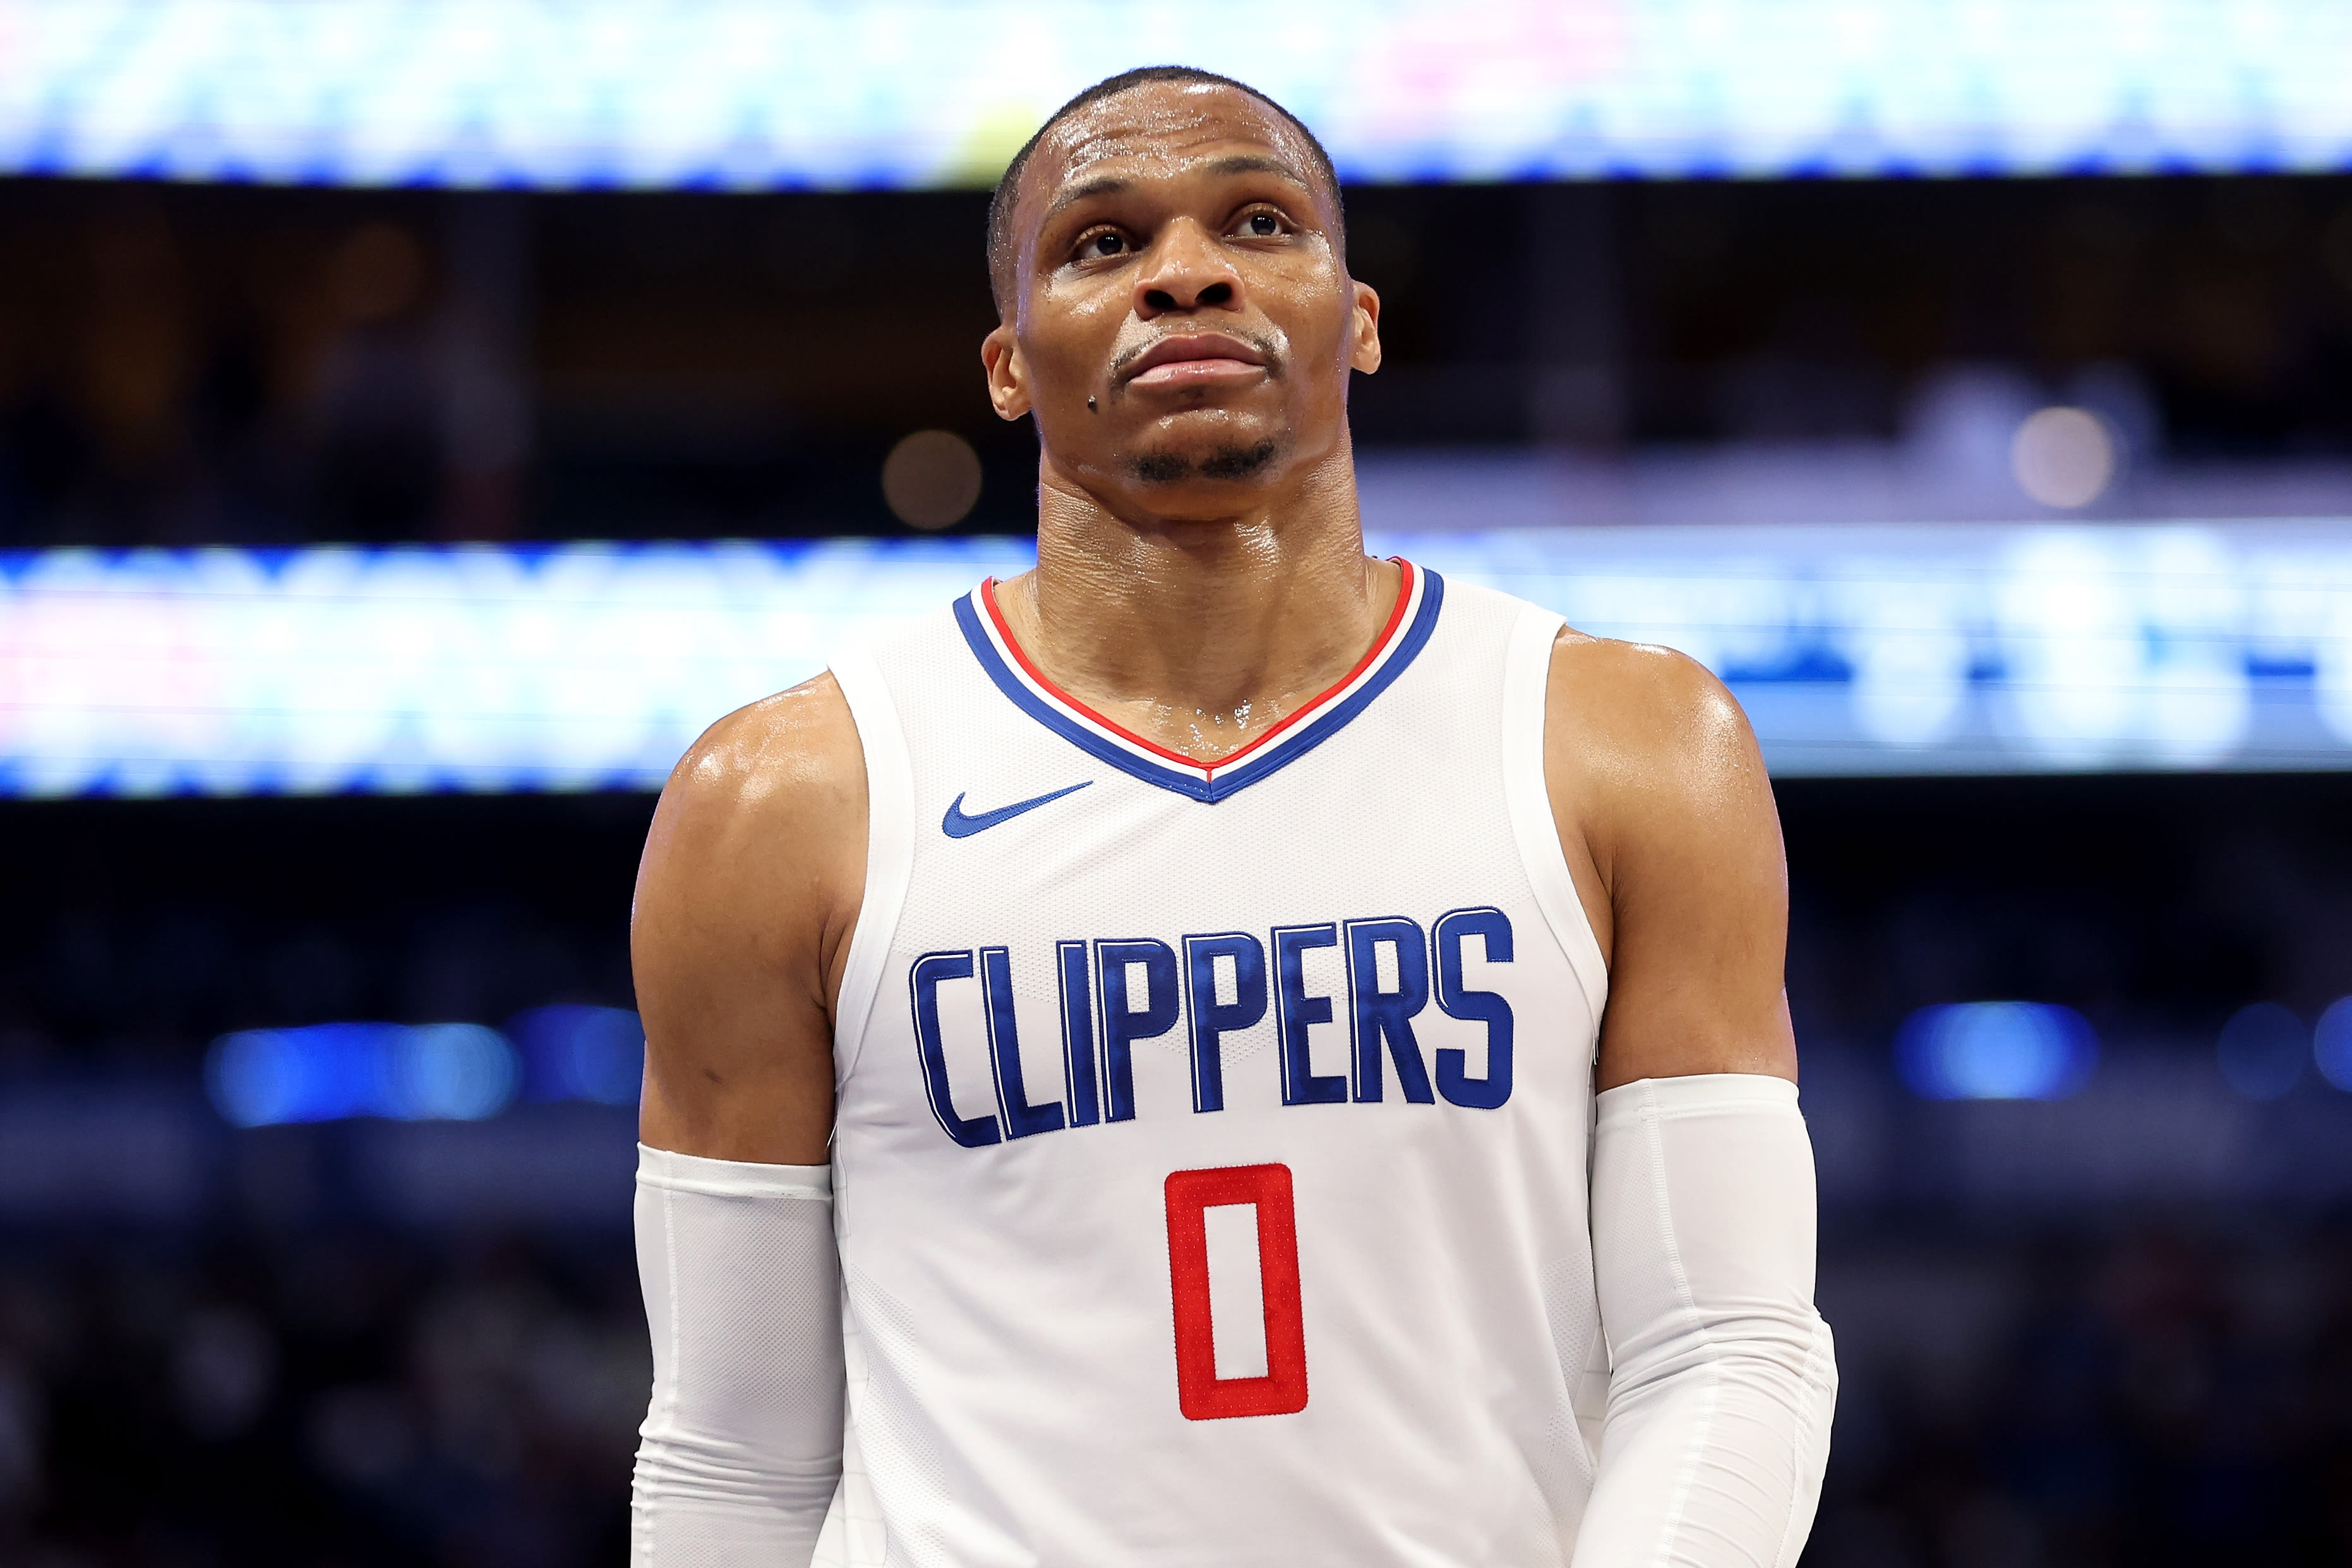 Clippers' Russell Westbrook Has Huge Free Agent Decision to Make